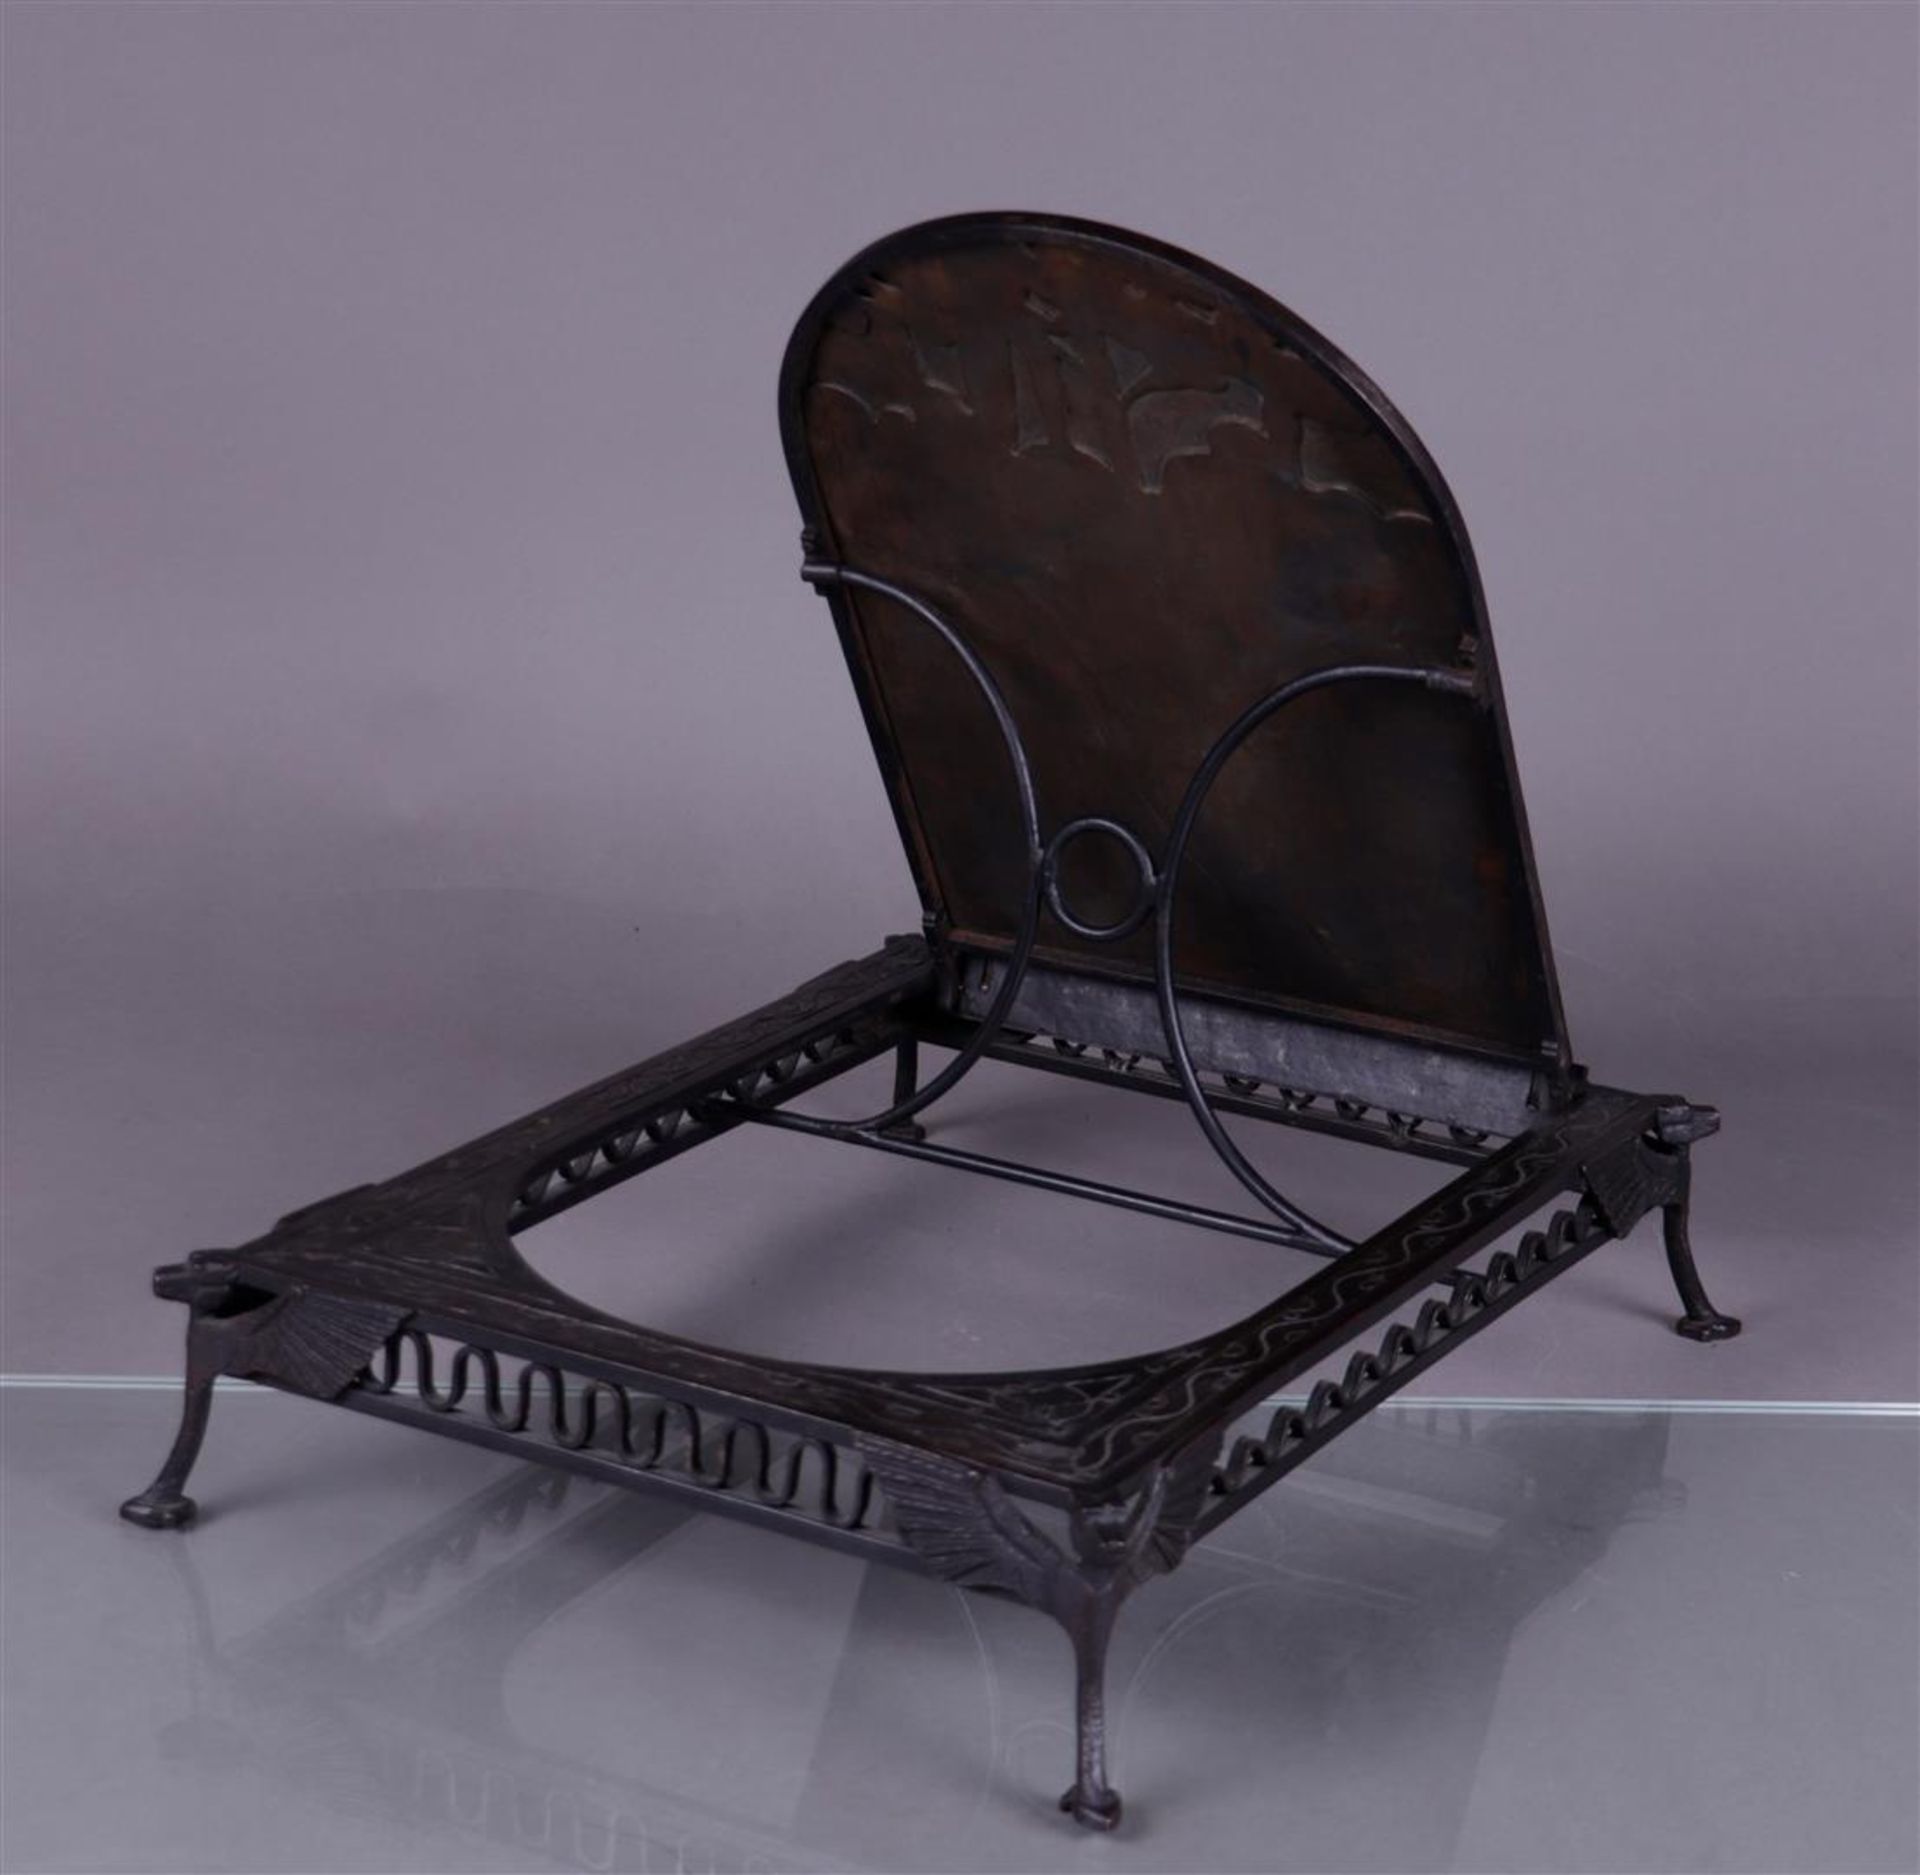 A wrought iron book stand depicting La Fontaine's Fable of the Fox and the Stork. ca. 1900.
43 x 32  - Bild 2 aus 2